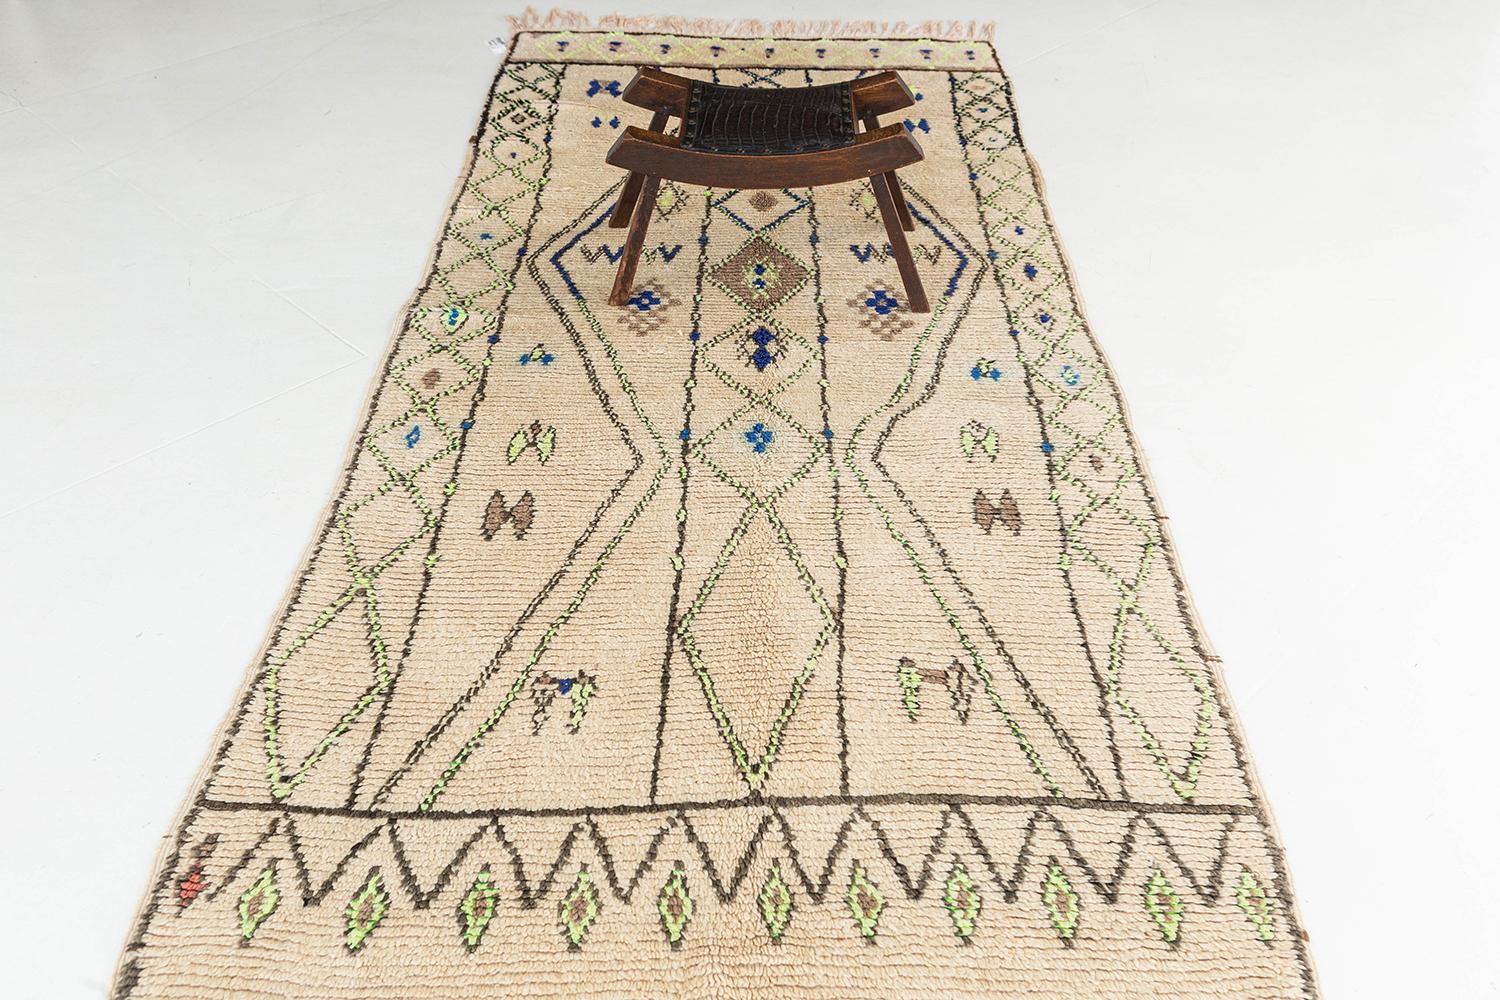 A fascinating vintage Moroccan Azilal Tribe Berber rug that features a variety of elaborate symmetrical motifs all over the cream field. This rug features various symbolic tribal elements that are meticulously woven throughout the piece, boasting